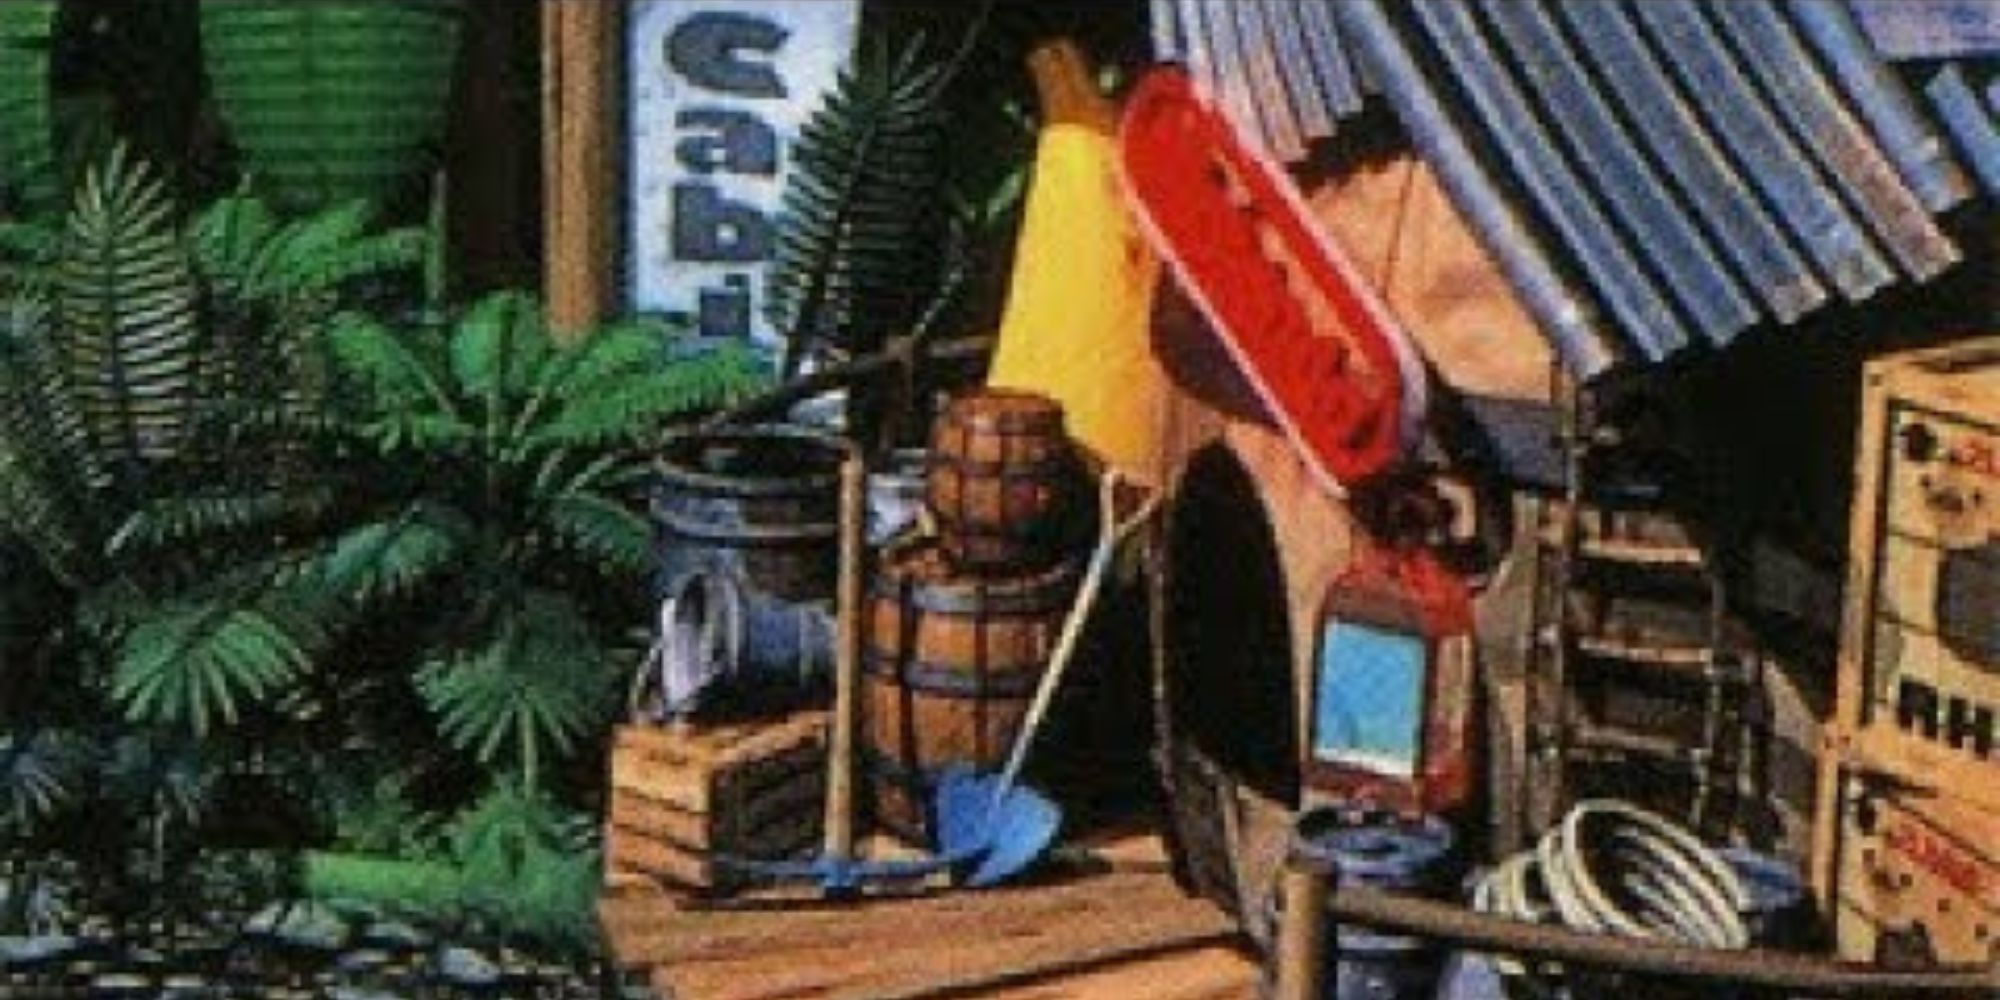 Crankys Cabin Donkey Kong Country